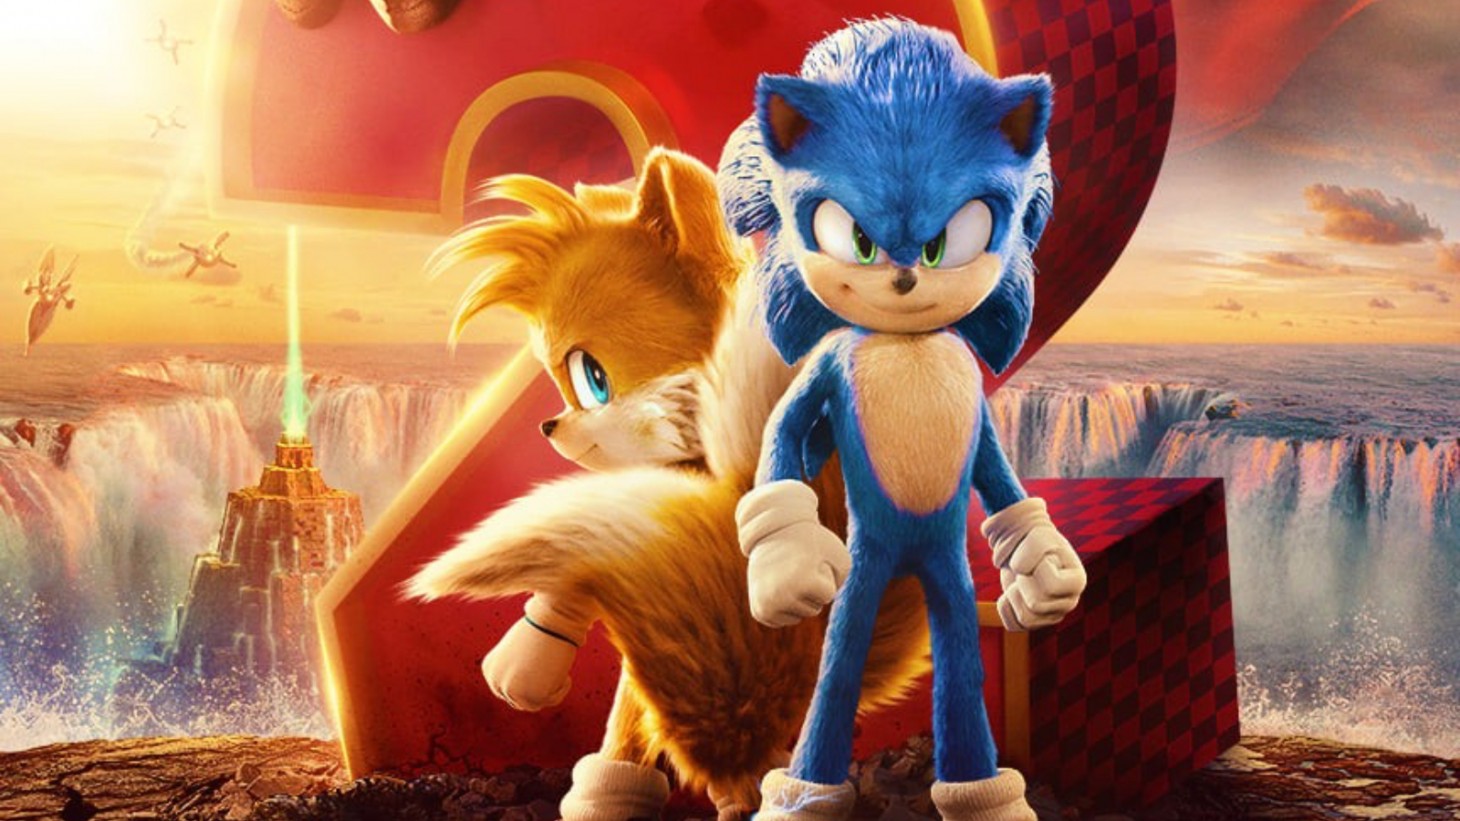 Sonic The Hedgehog 2 Is The Highest Grossing Video Game Movie Of All Time  In The US - Game Informer